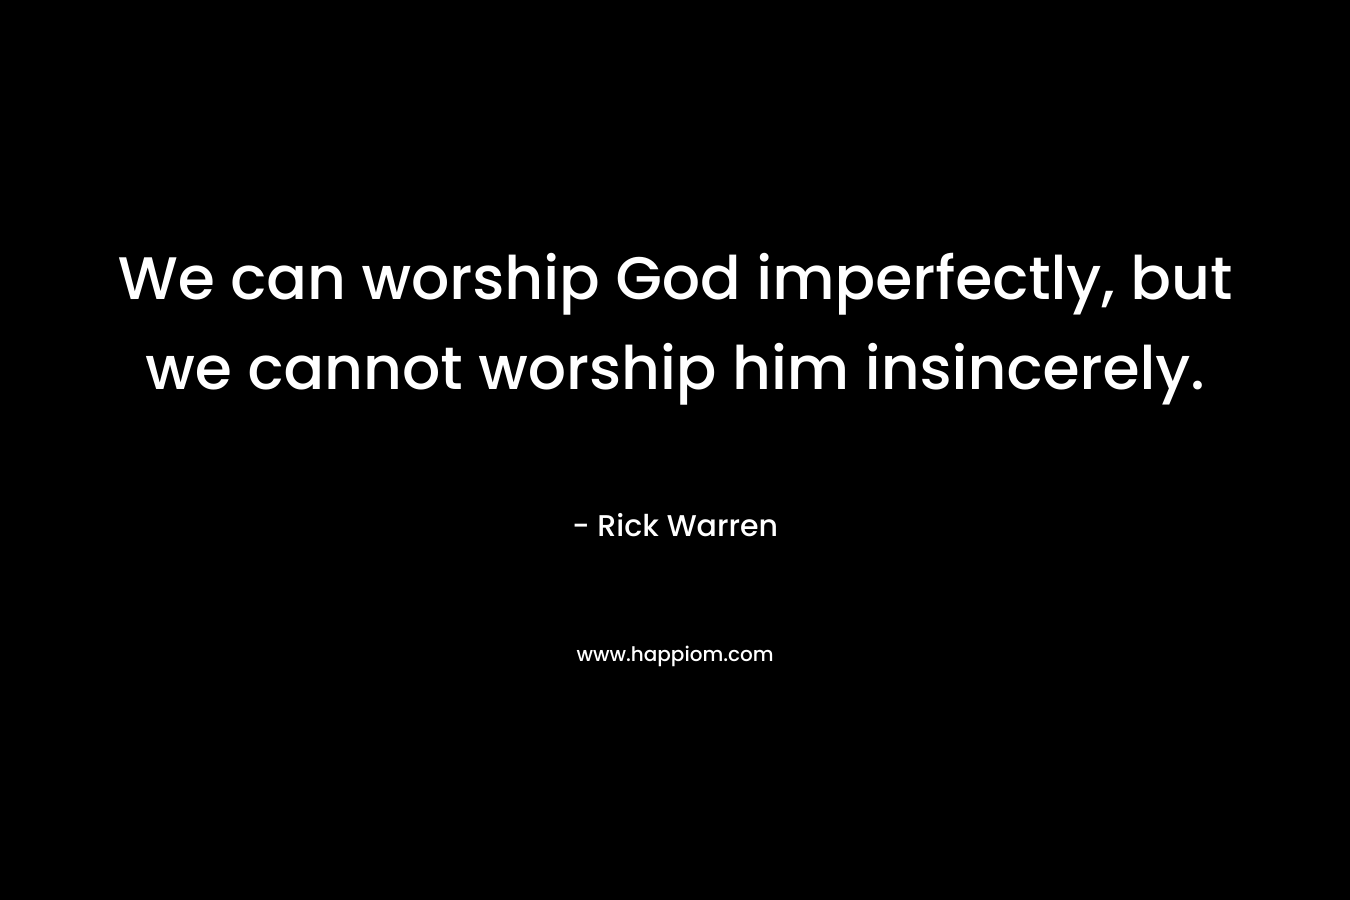 We can worship God imperfectly, but we cannot worship him insincerely. – Rick Warren